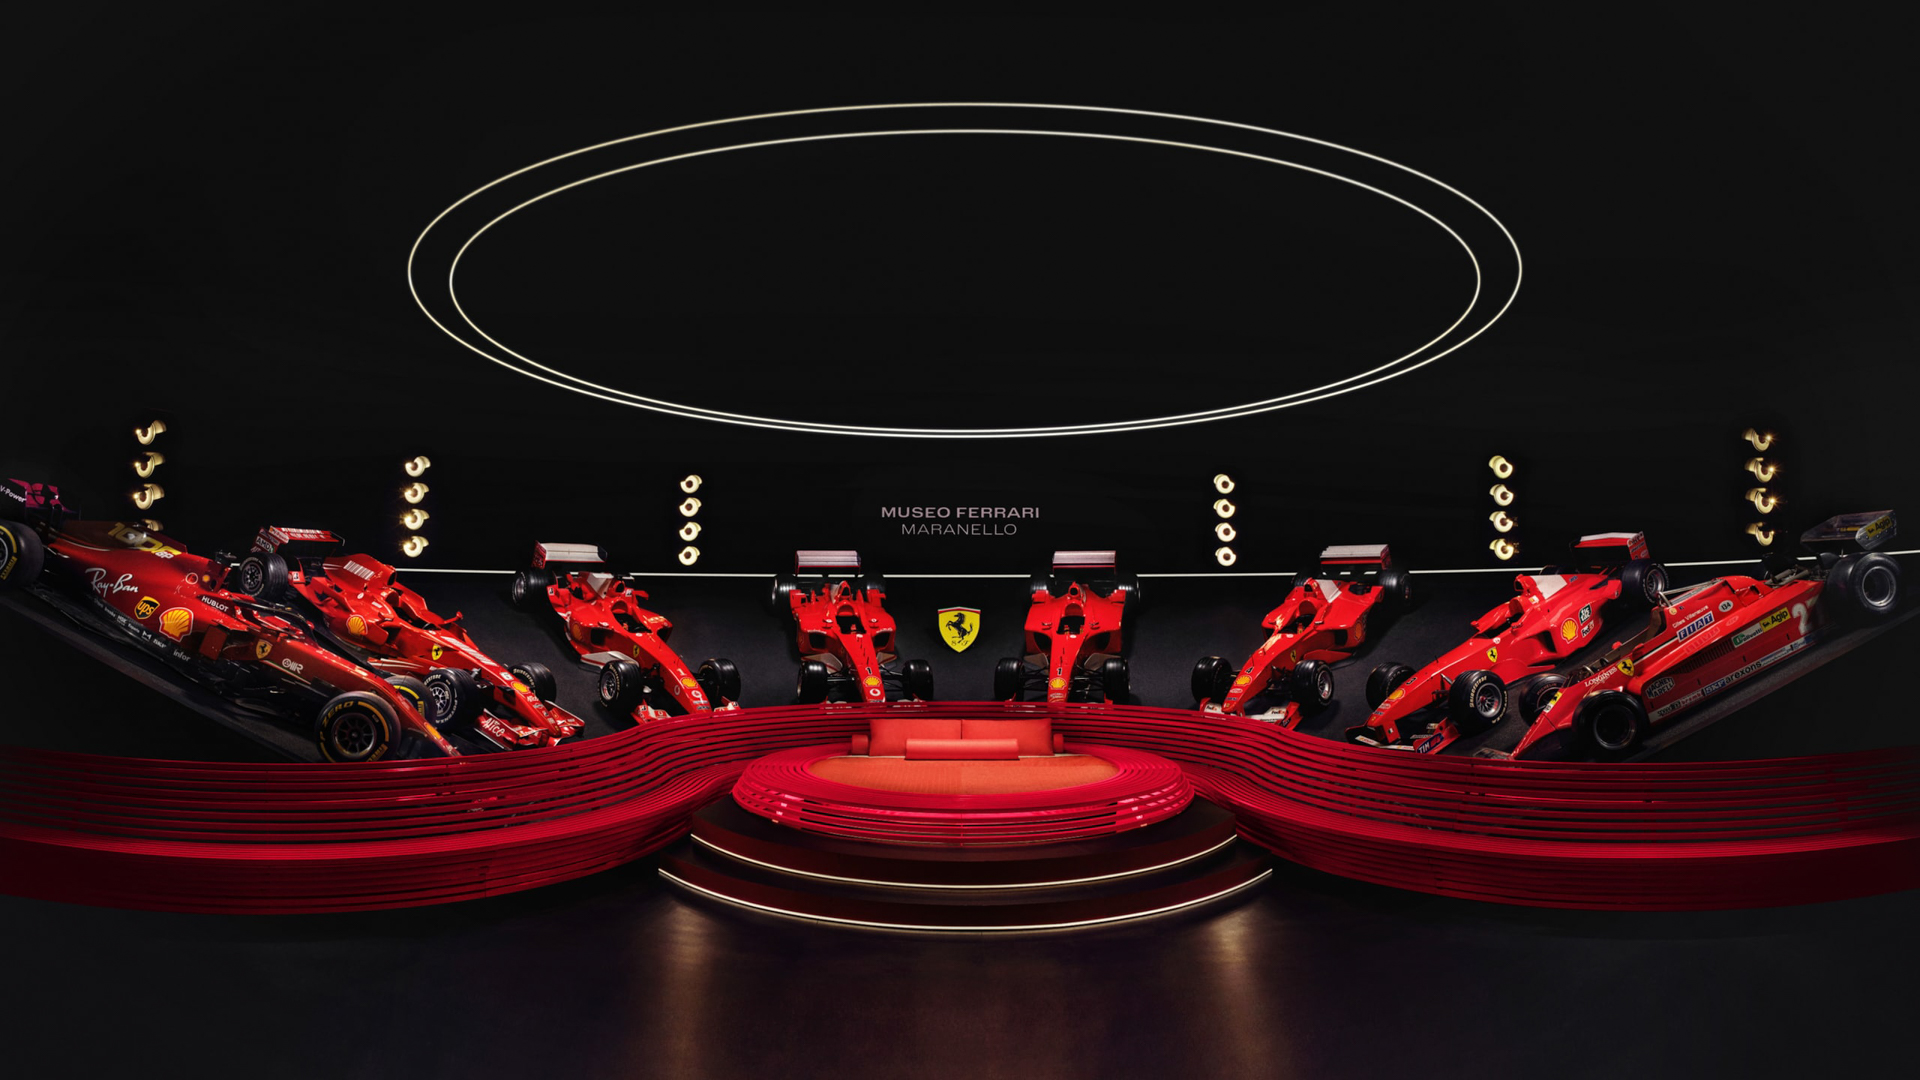 You Can Sleep With the Cars: The Ferrari Museum Is Now Listed on Airbnb